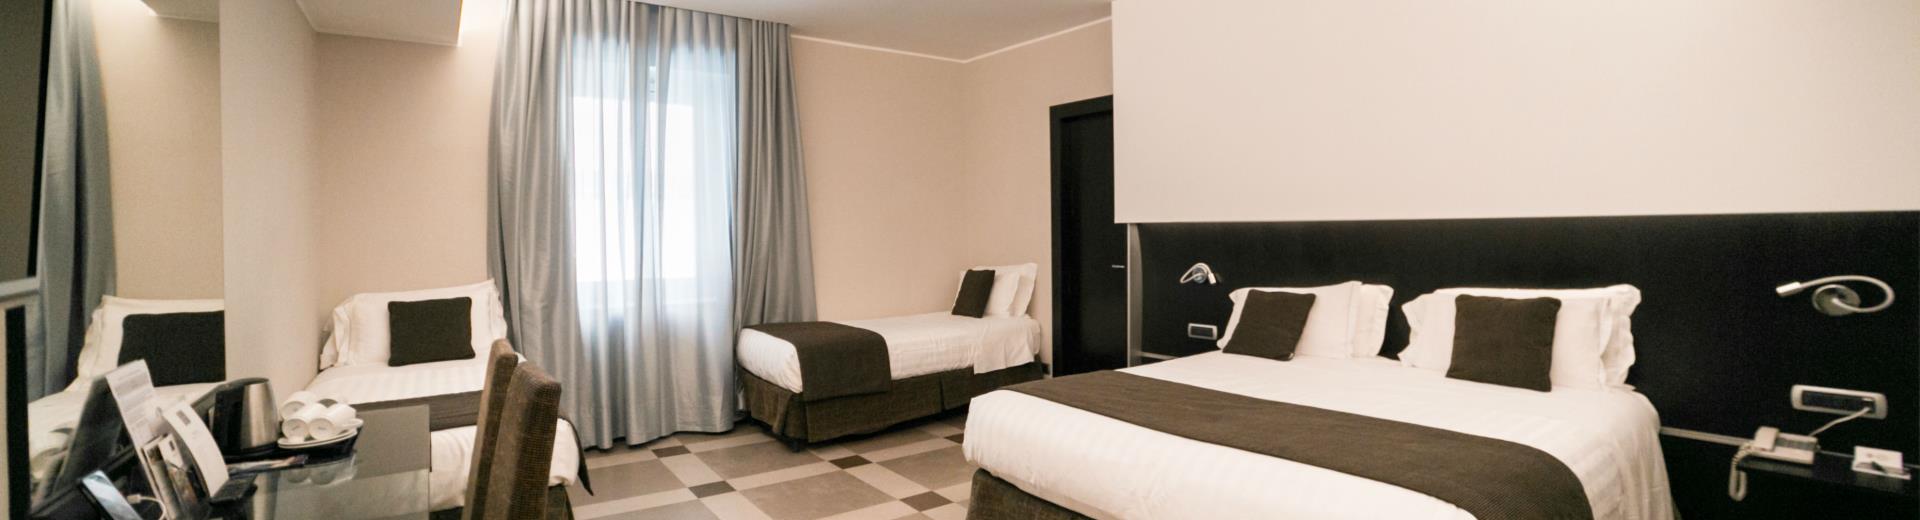 Family Superior Room-Best Western Hotel Universo Rome 4 stars